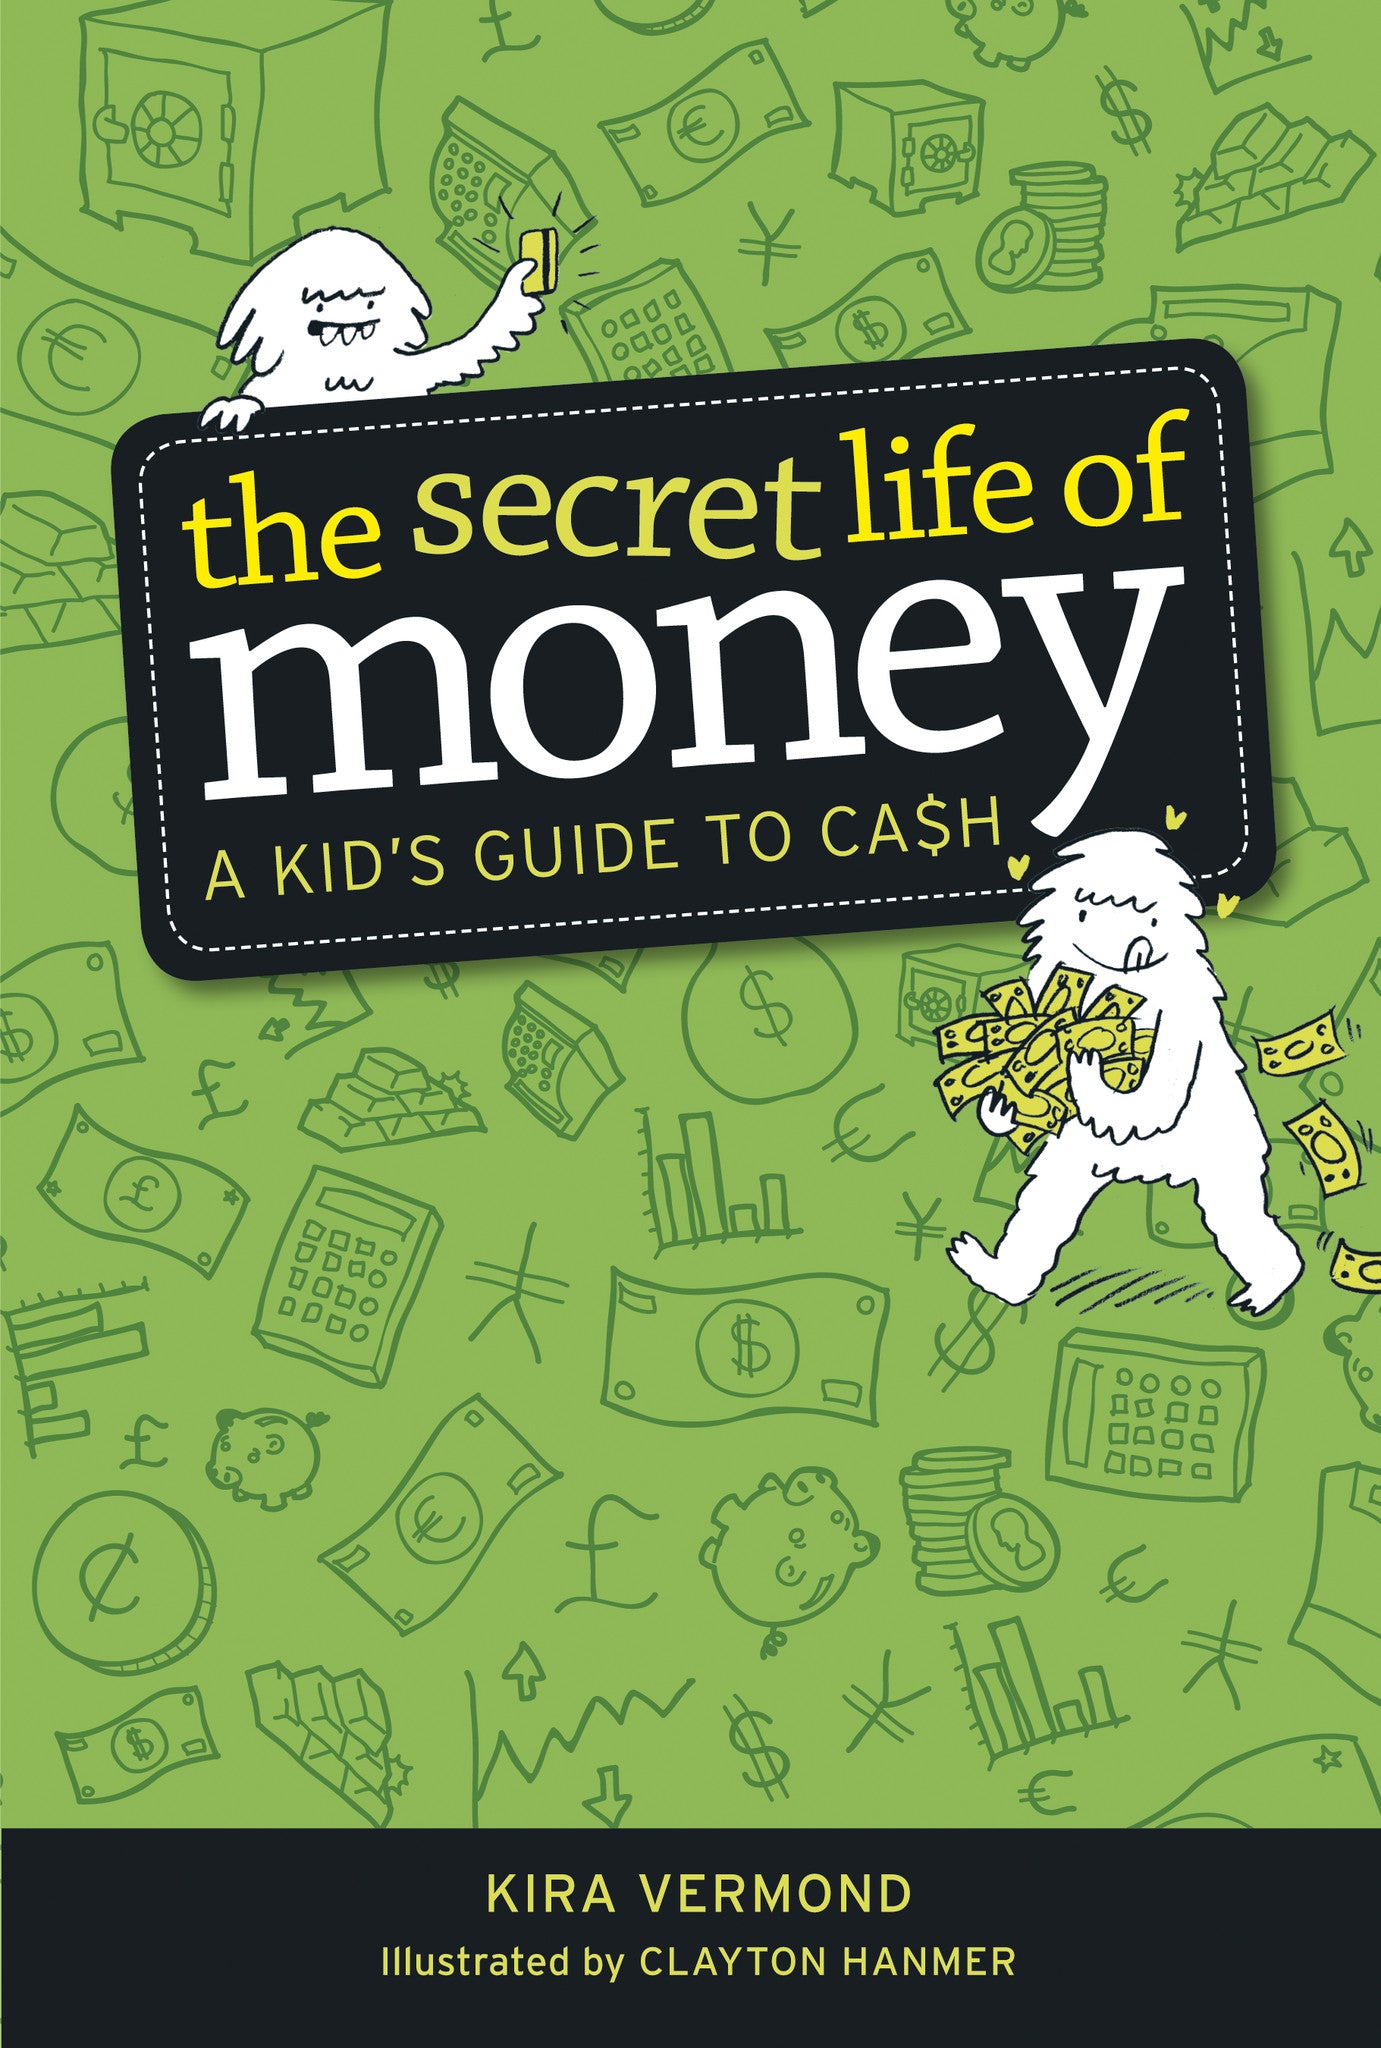 The Secret Life of Money - Owlkids - Reading for kids and literacy resources for parents made fun. Books helping kids to learn.